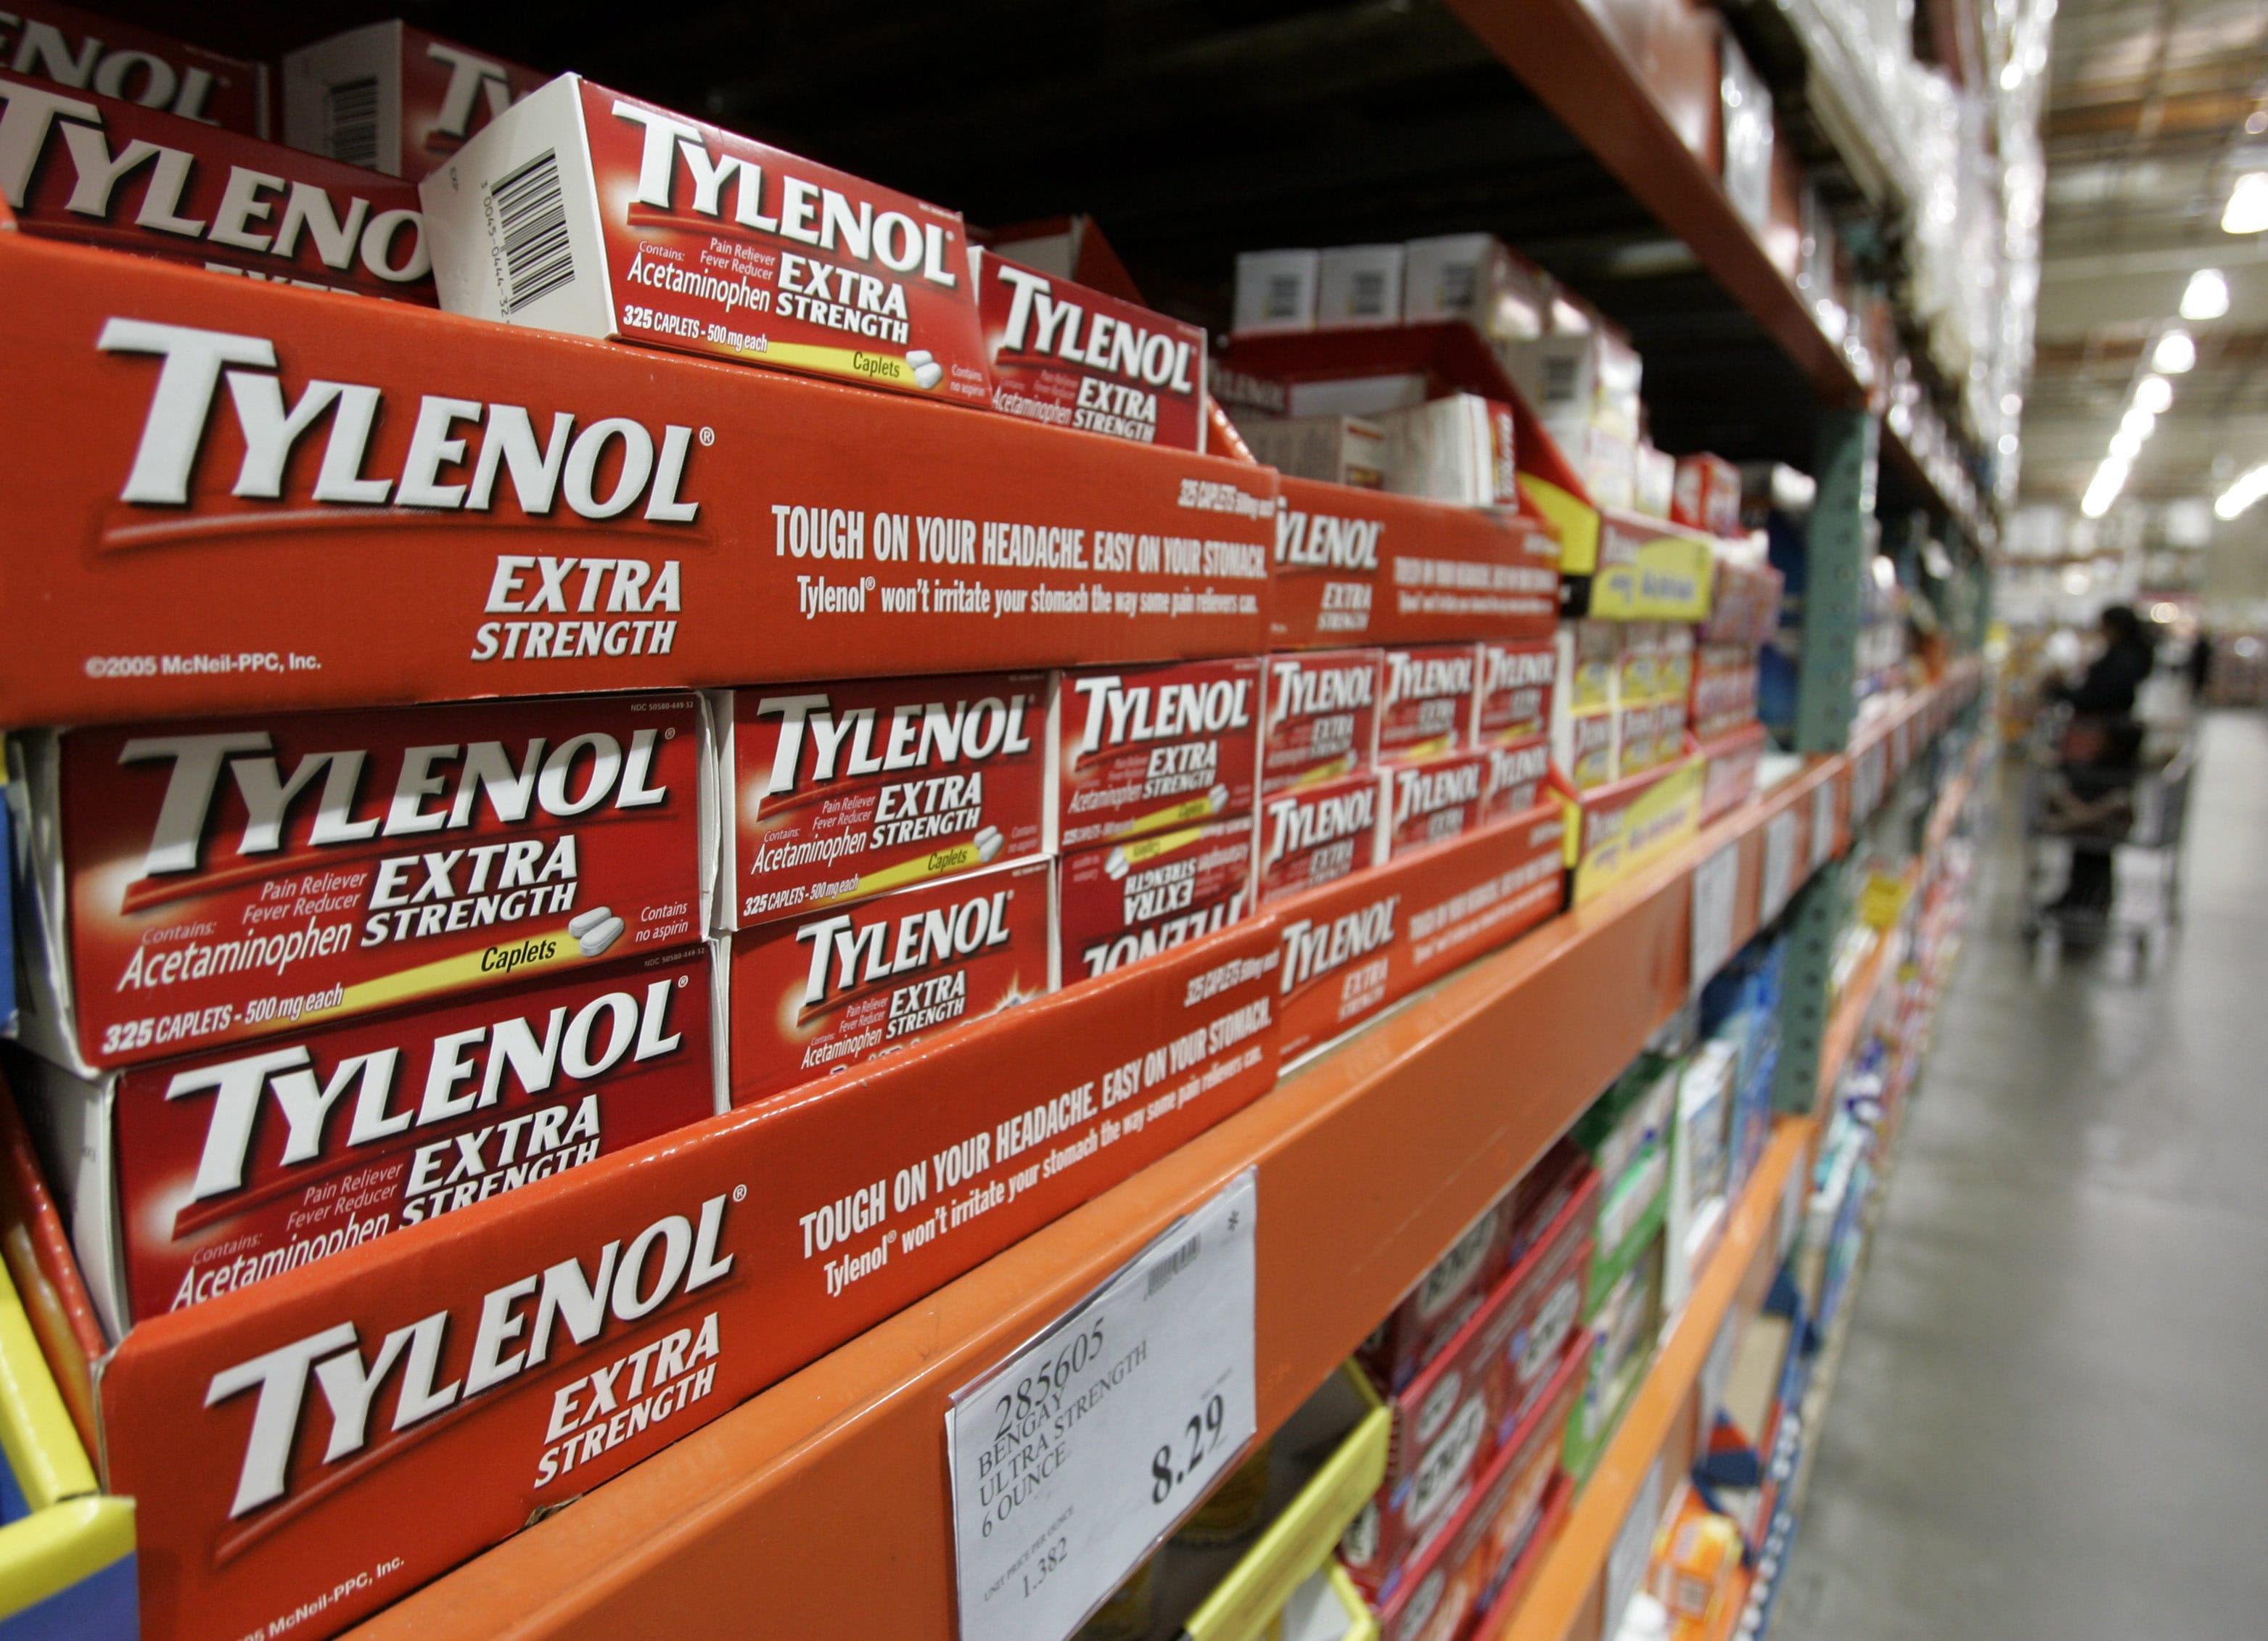 Tylenol is one of the common brands of over-the-counter acetaminophen, a painkiller that can cause liver damage, even fatally, in large doses.